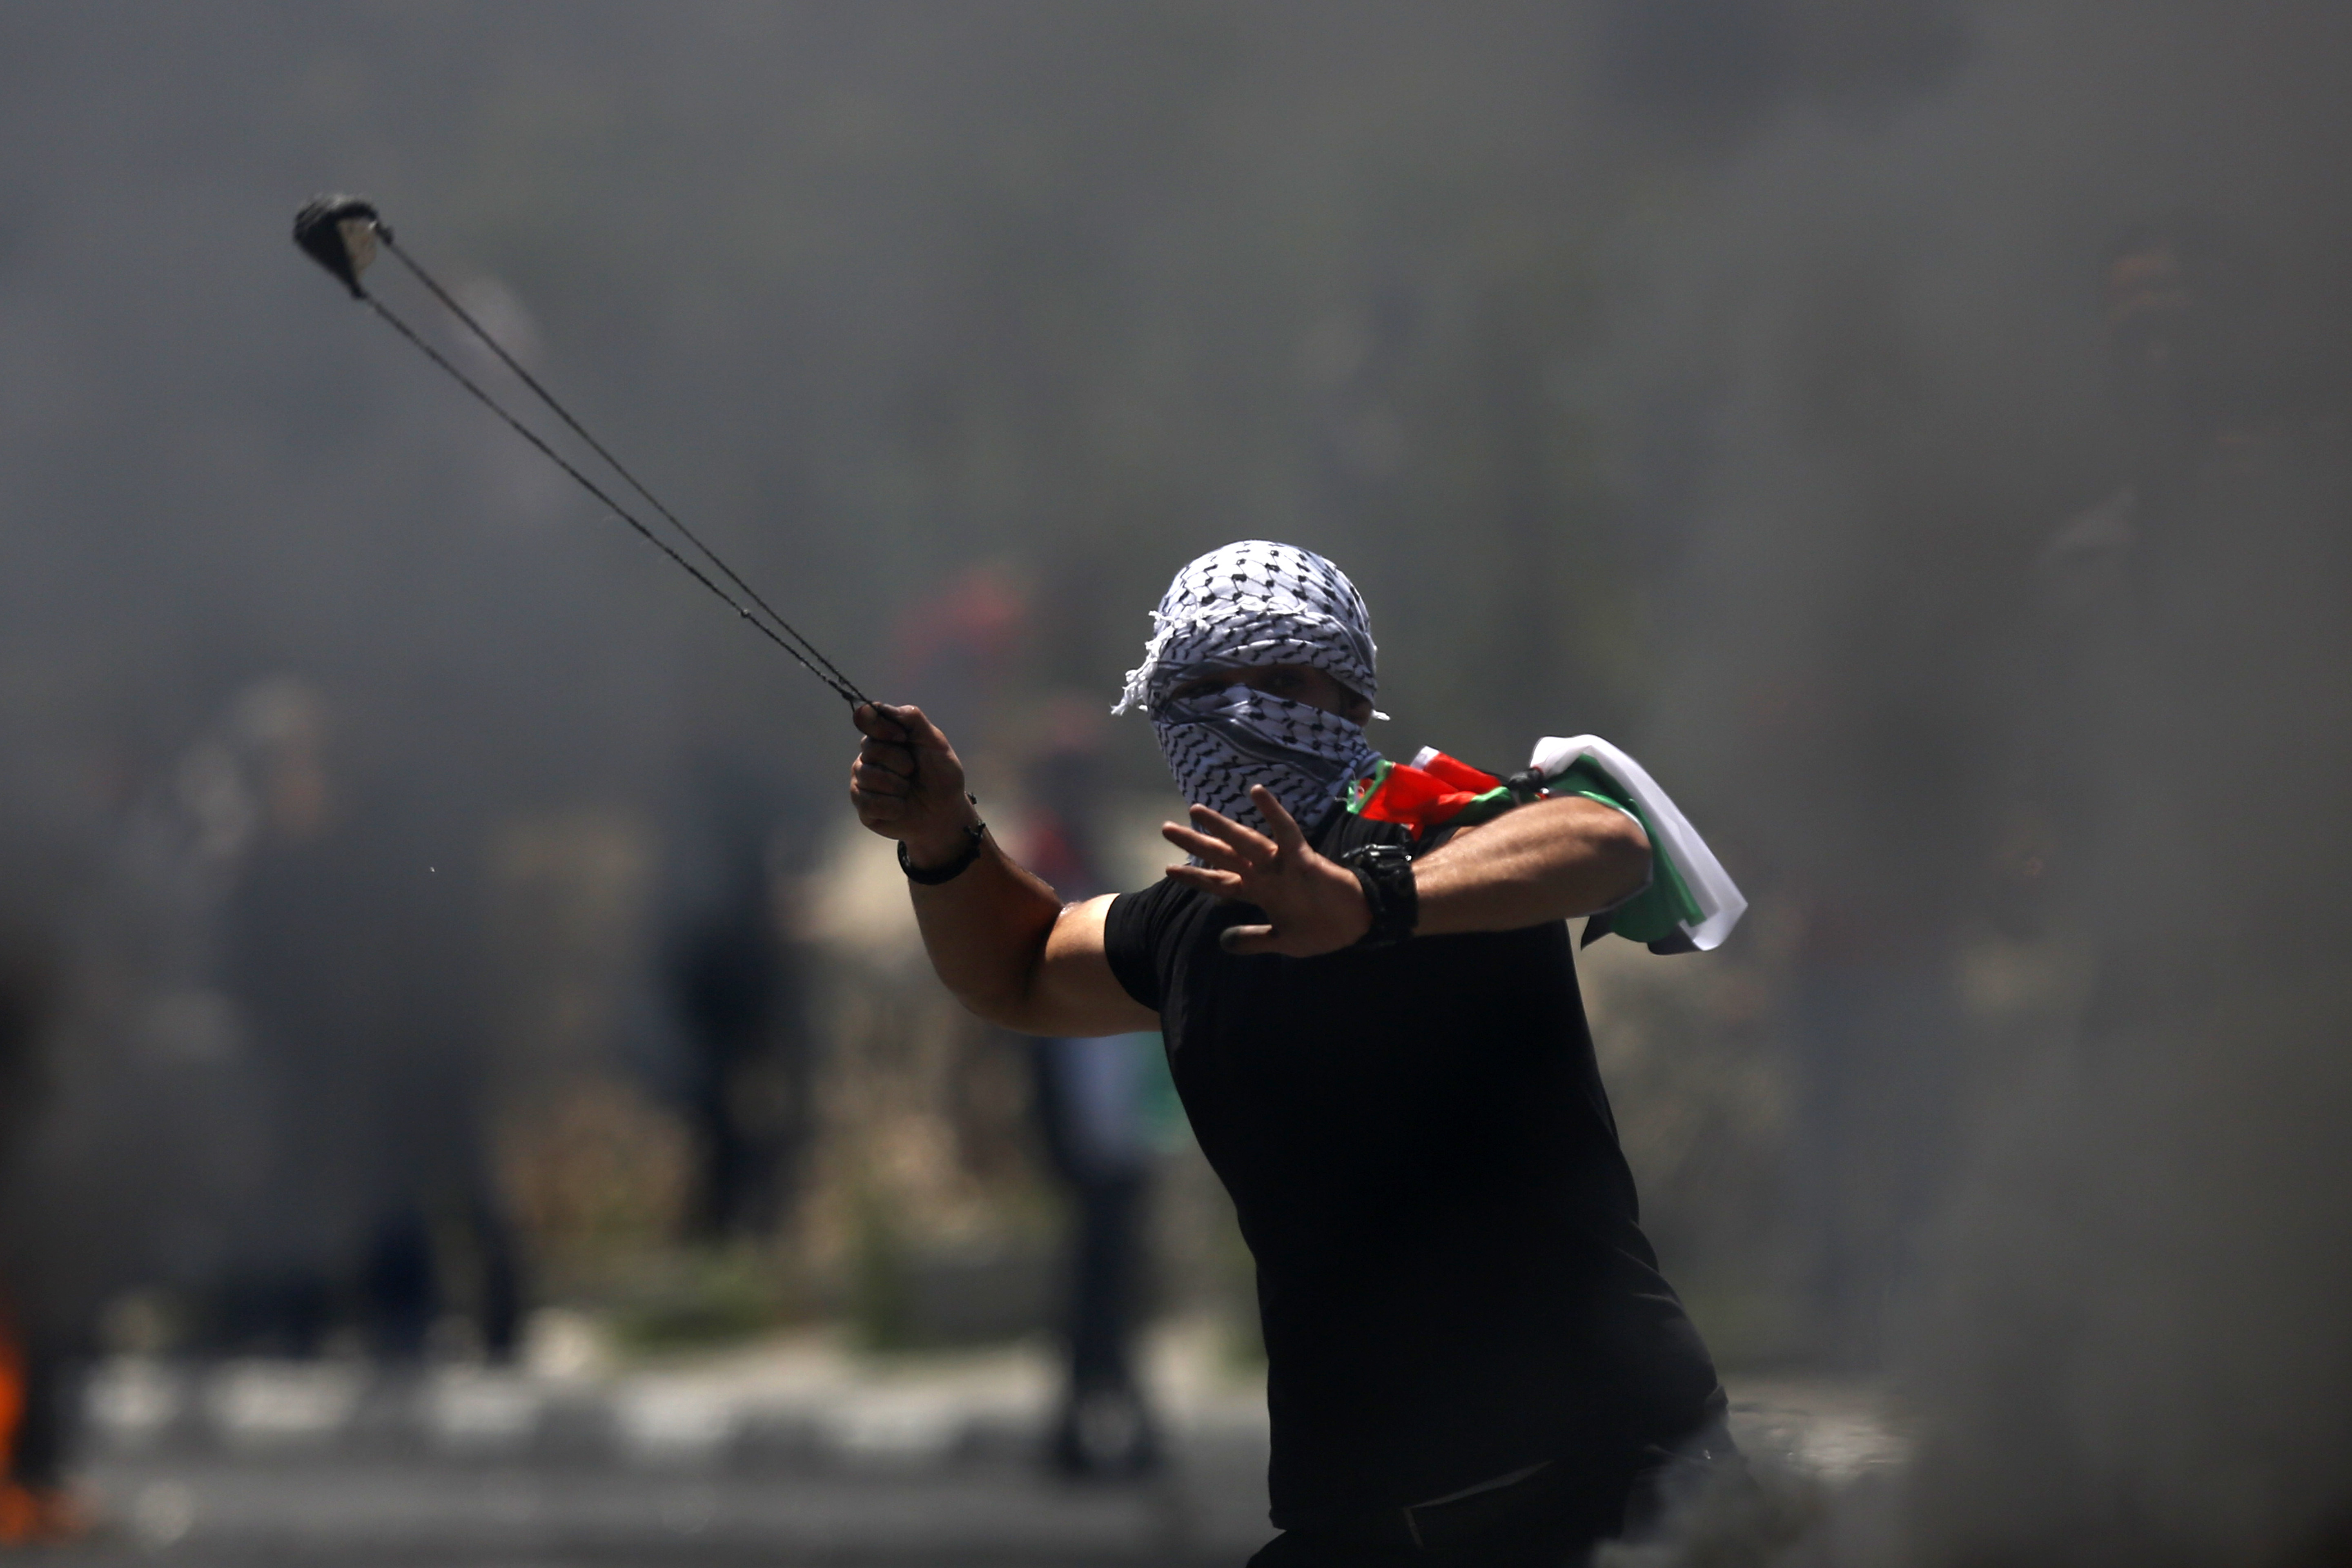 A Palestinian protester hurls a stone during clashes with Israeli forces after a rally to mark the 70th anniversary of what Palestinians call their 